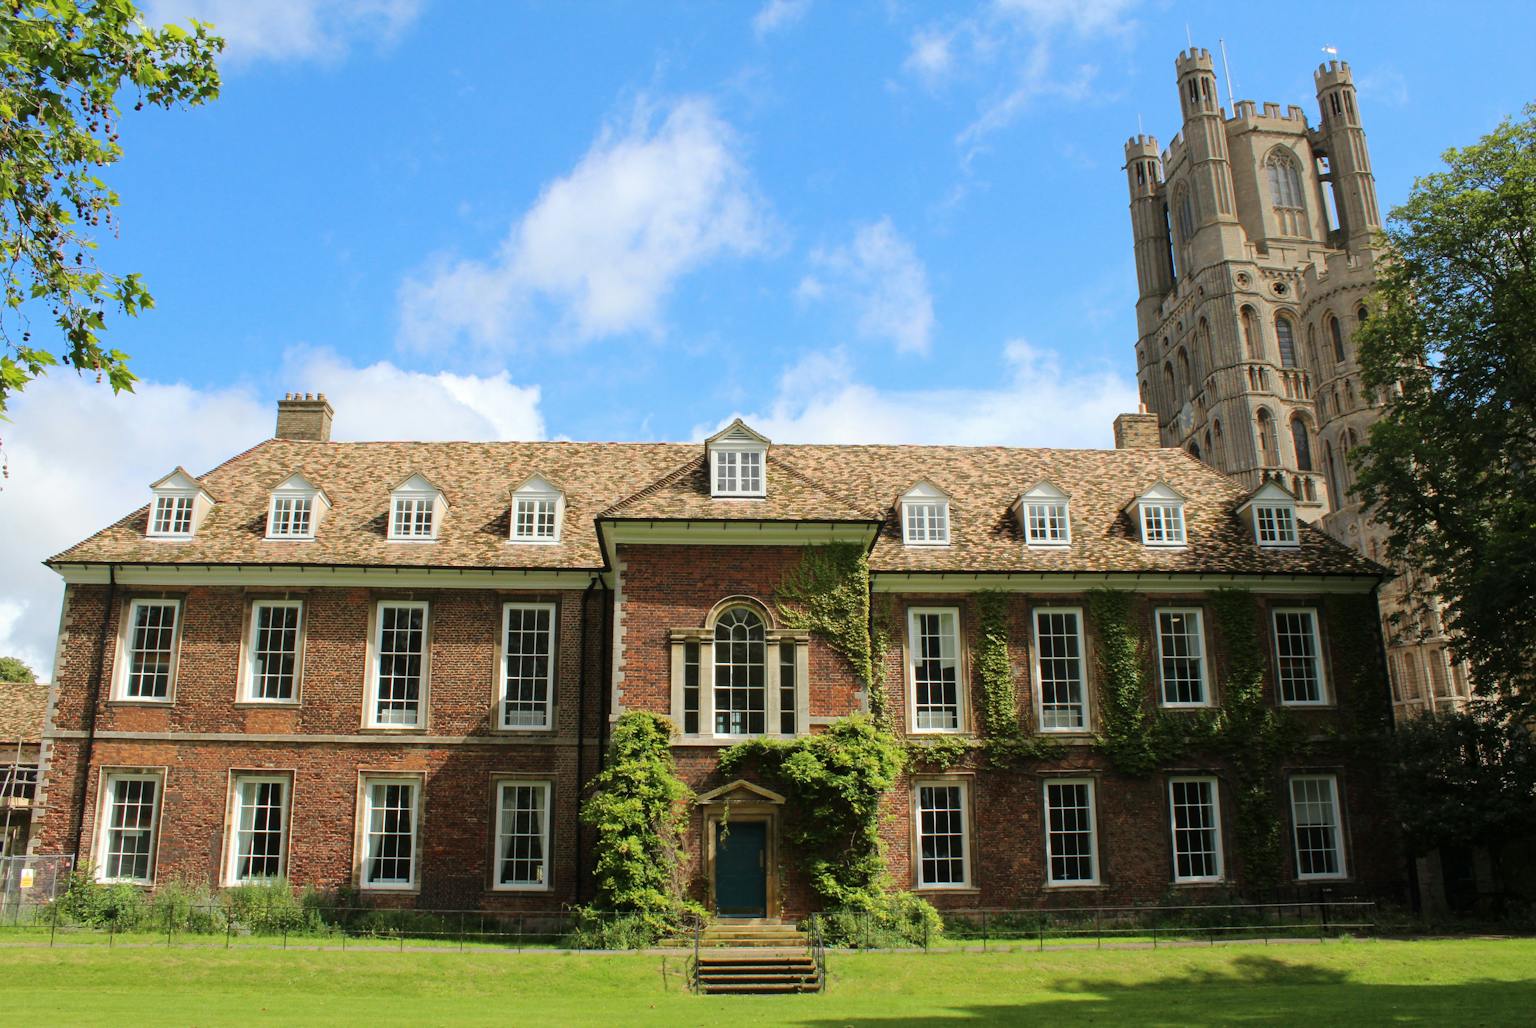 The Old Palace building of King's Ely